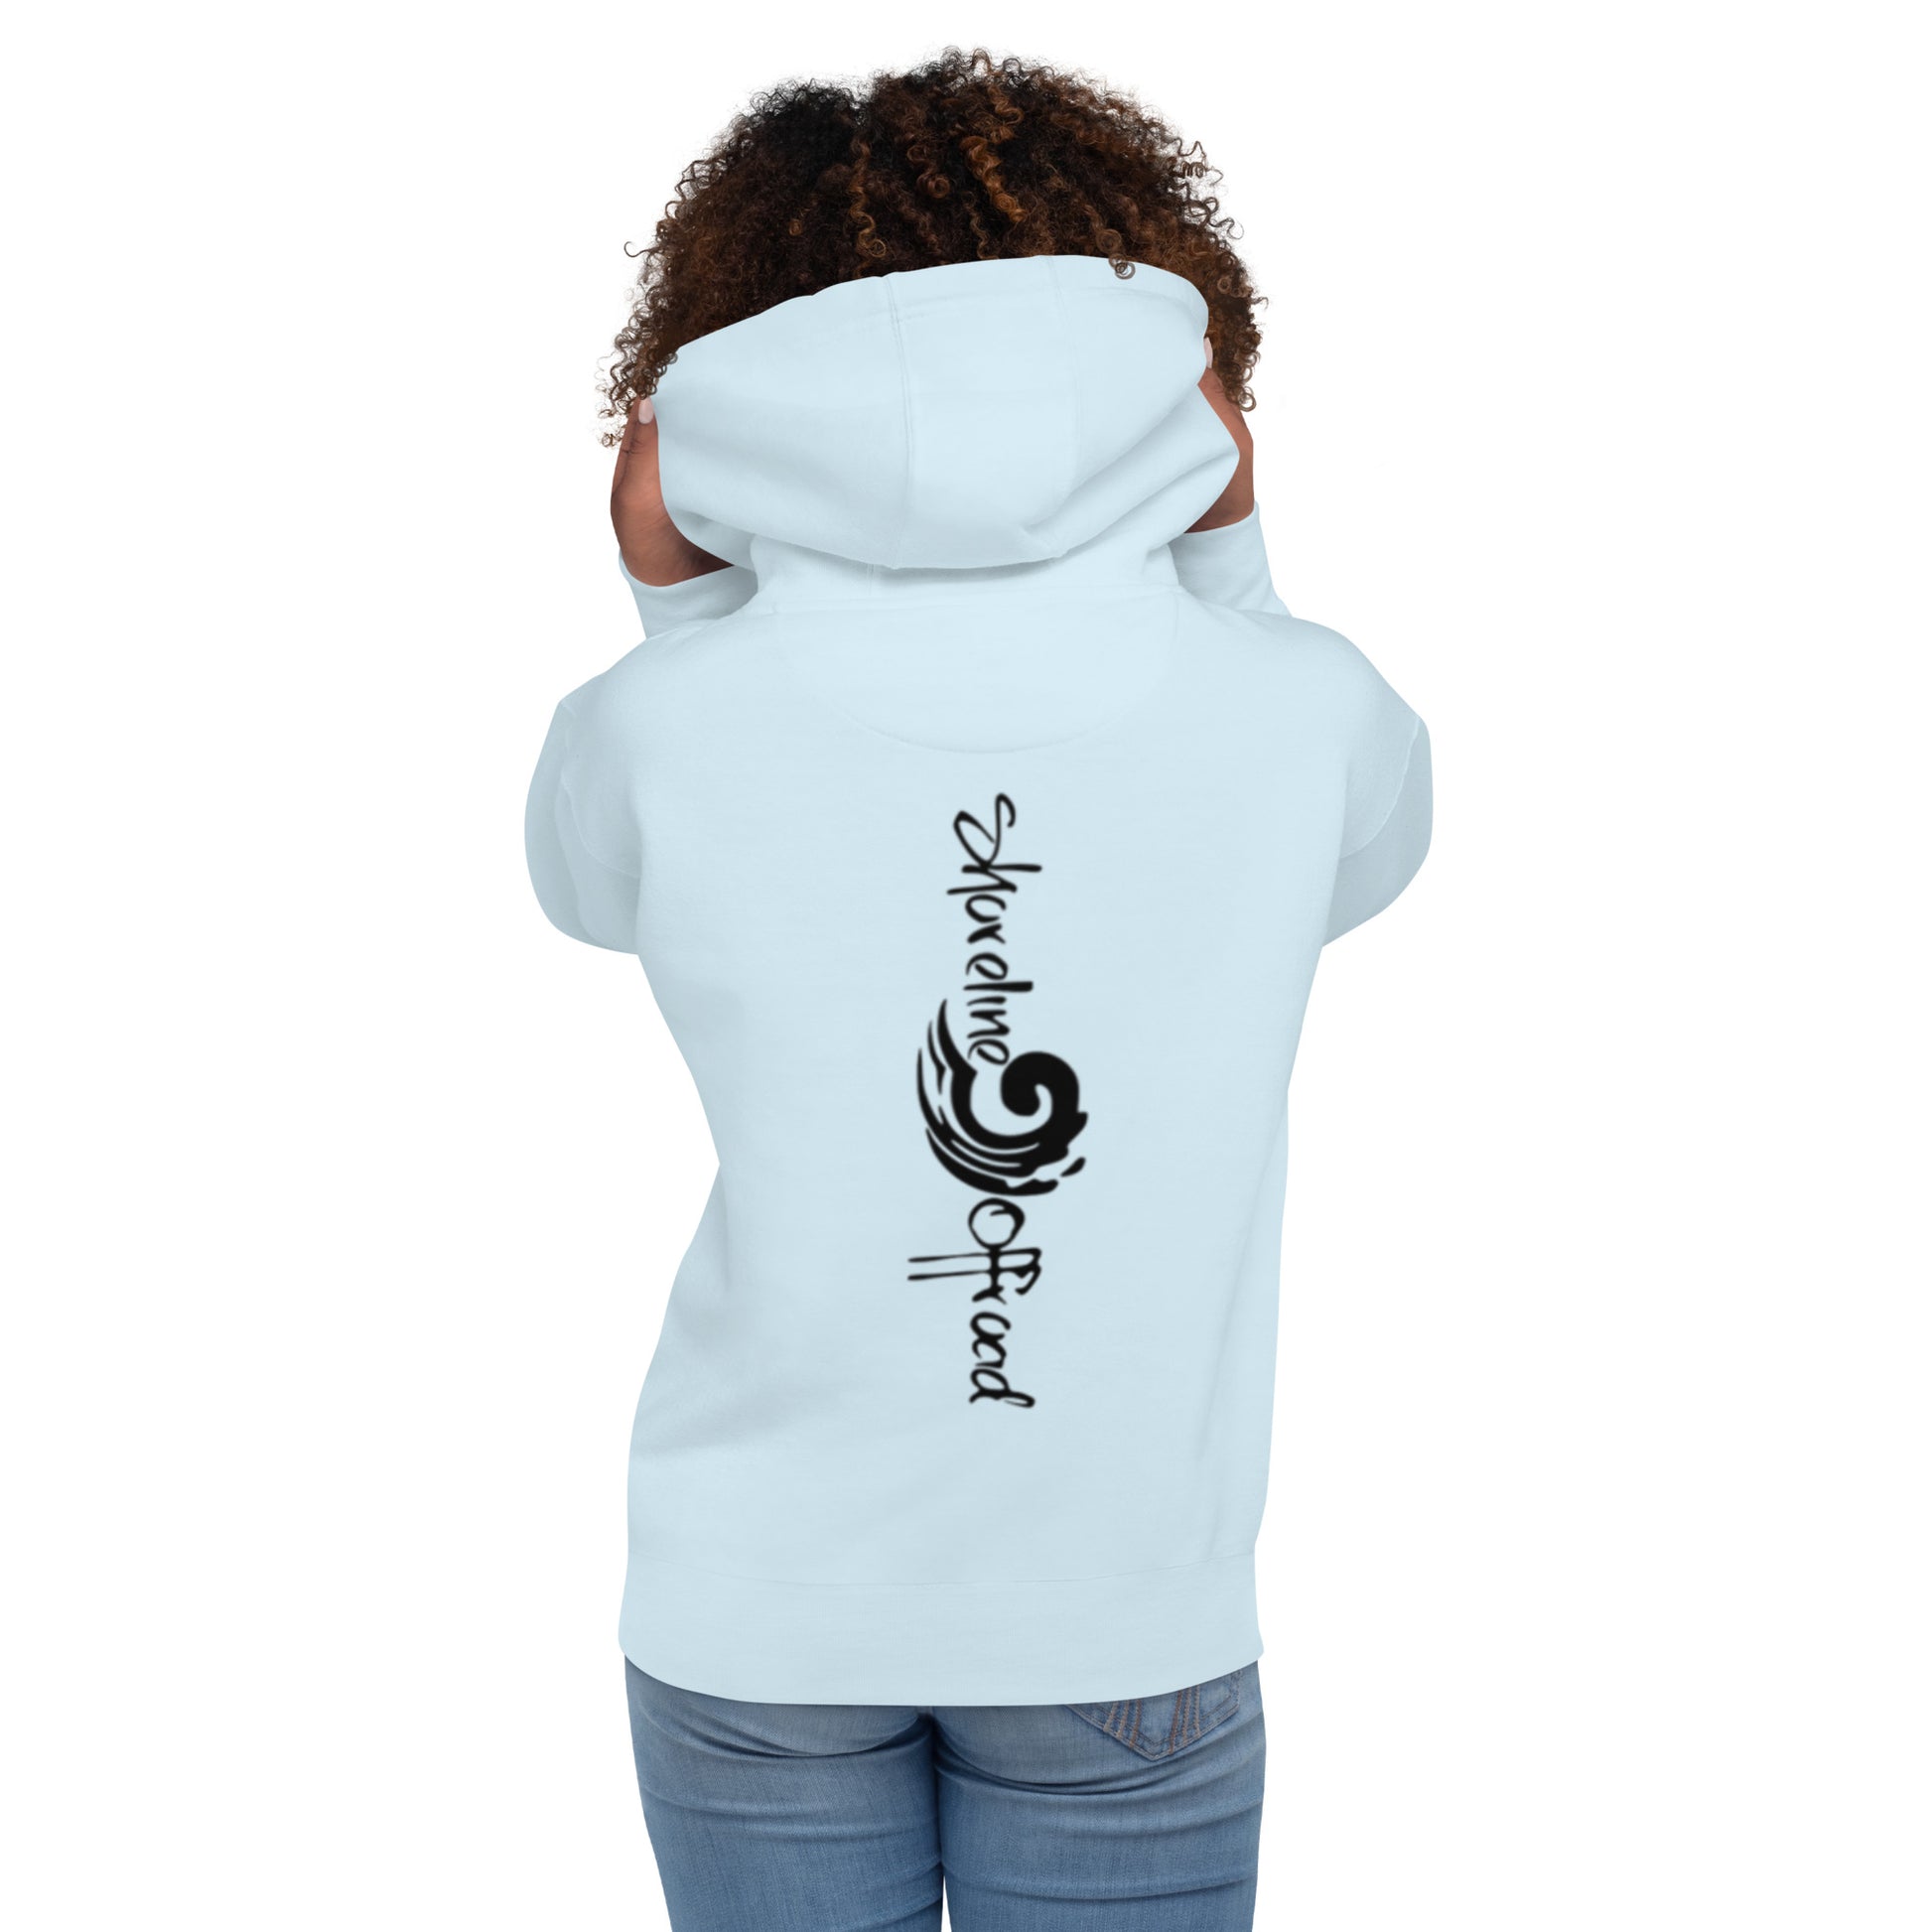 a woman wearing a white hoodie with a black design on it